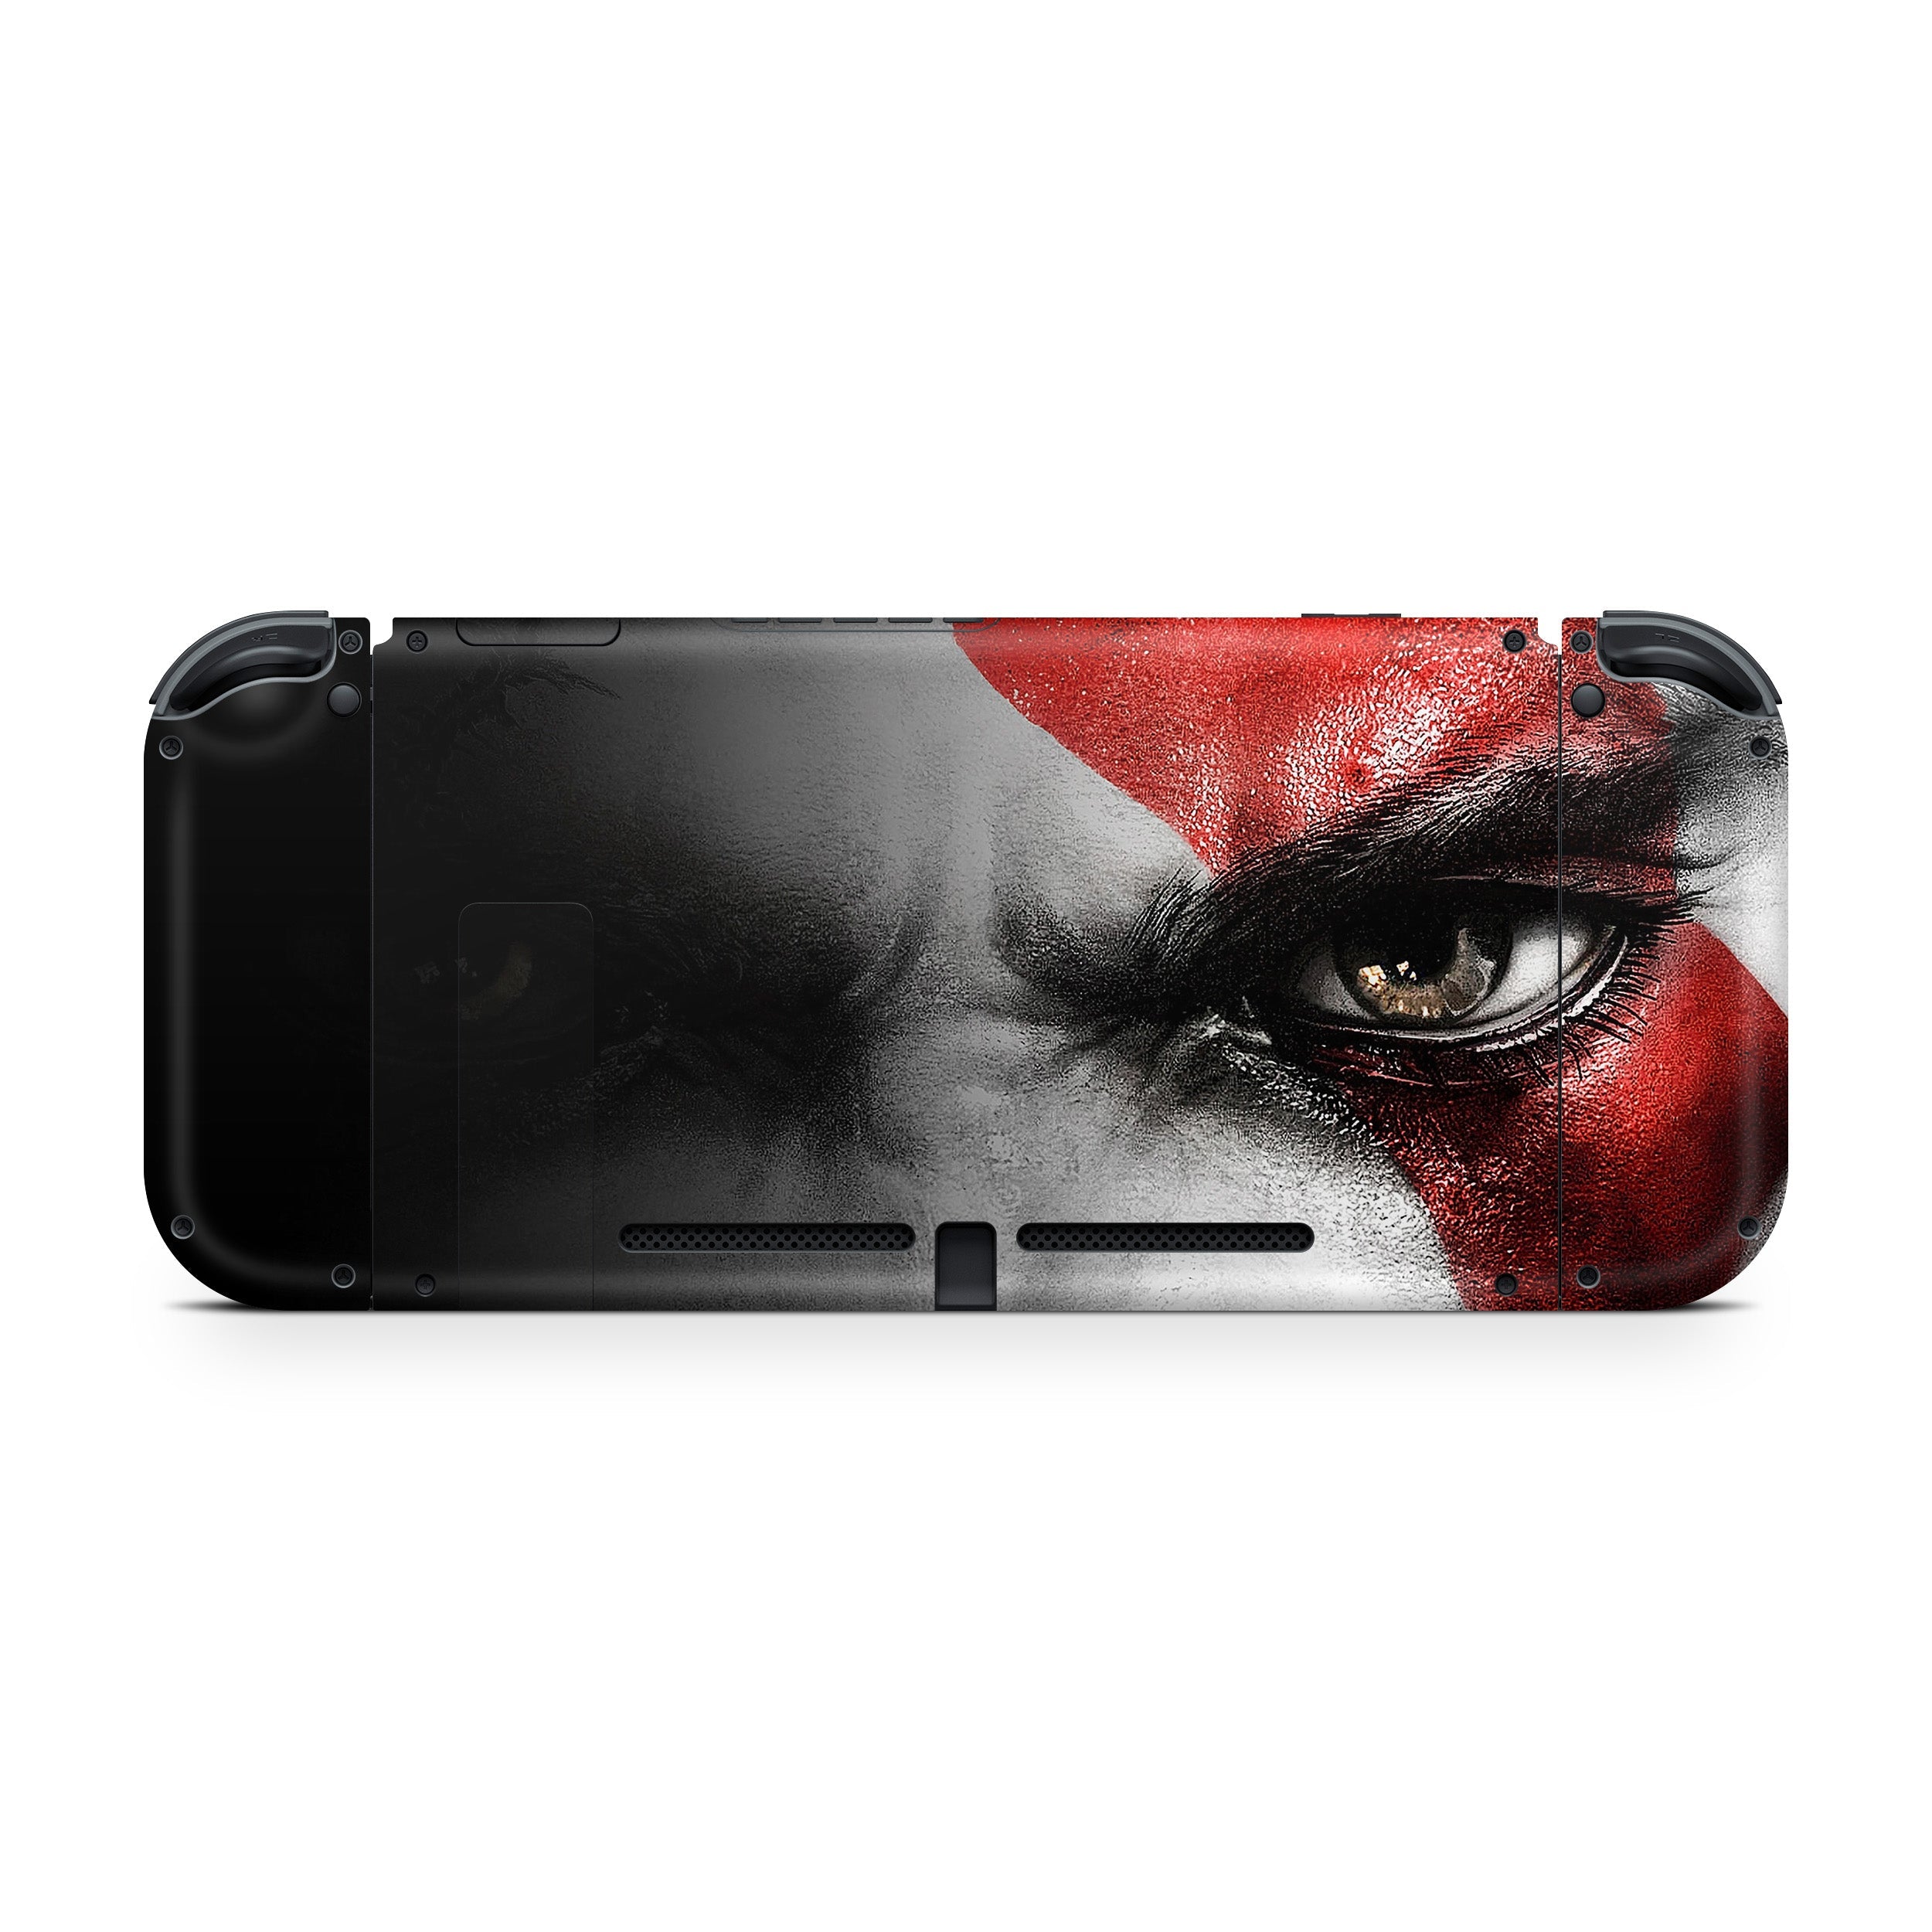 A video game skin featuring a God Of War Kratos design for the Nintendo Switch.